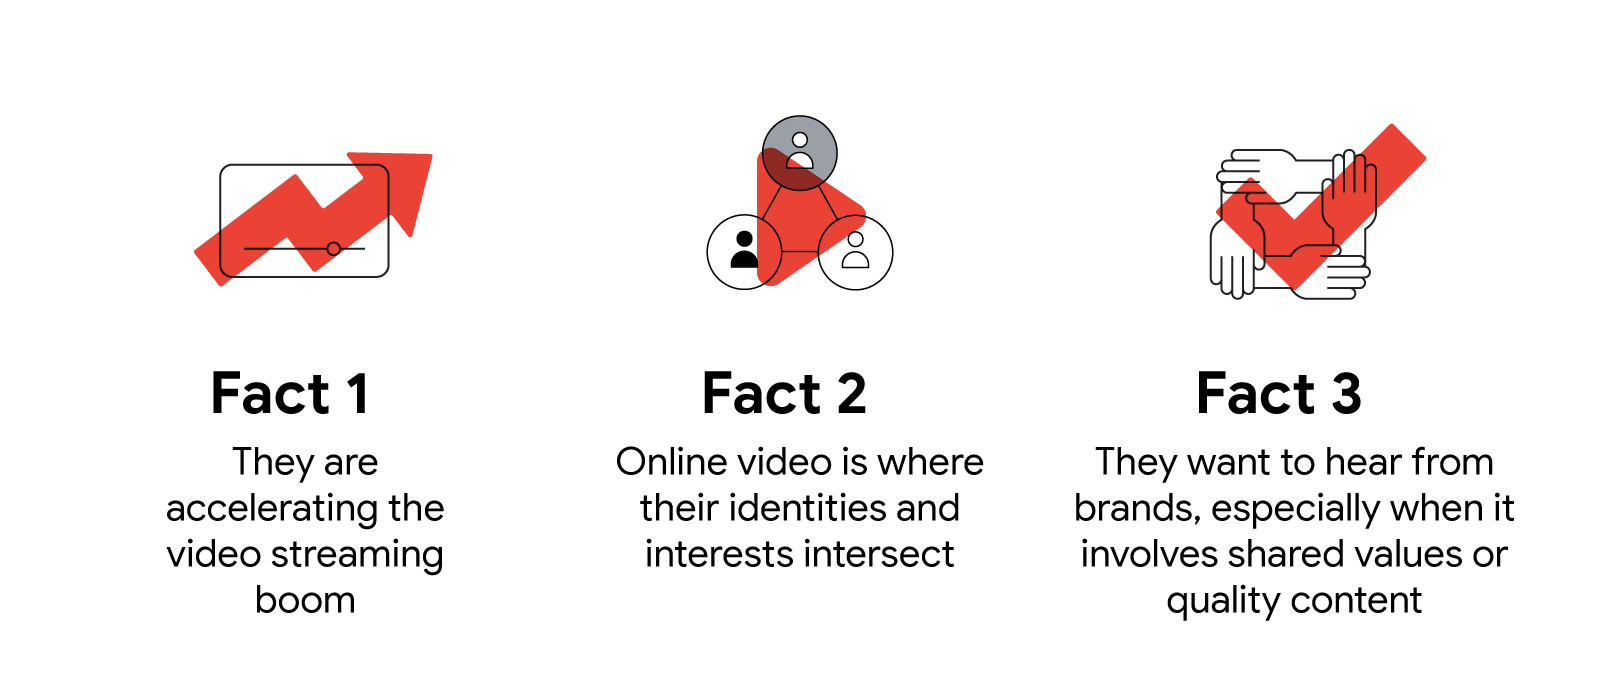 Fact 1: They are accelerating the video streaming boom. Fact 2: Online video is where their identities and interests intersect. Fact 3: They want to hear from brands, especially when it involves shared values or quality content